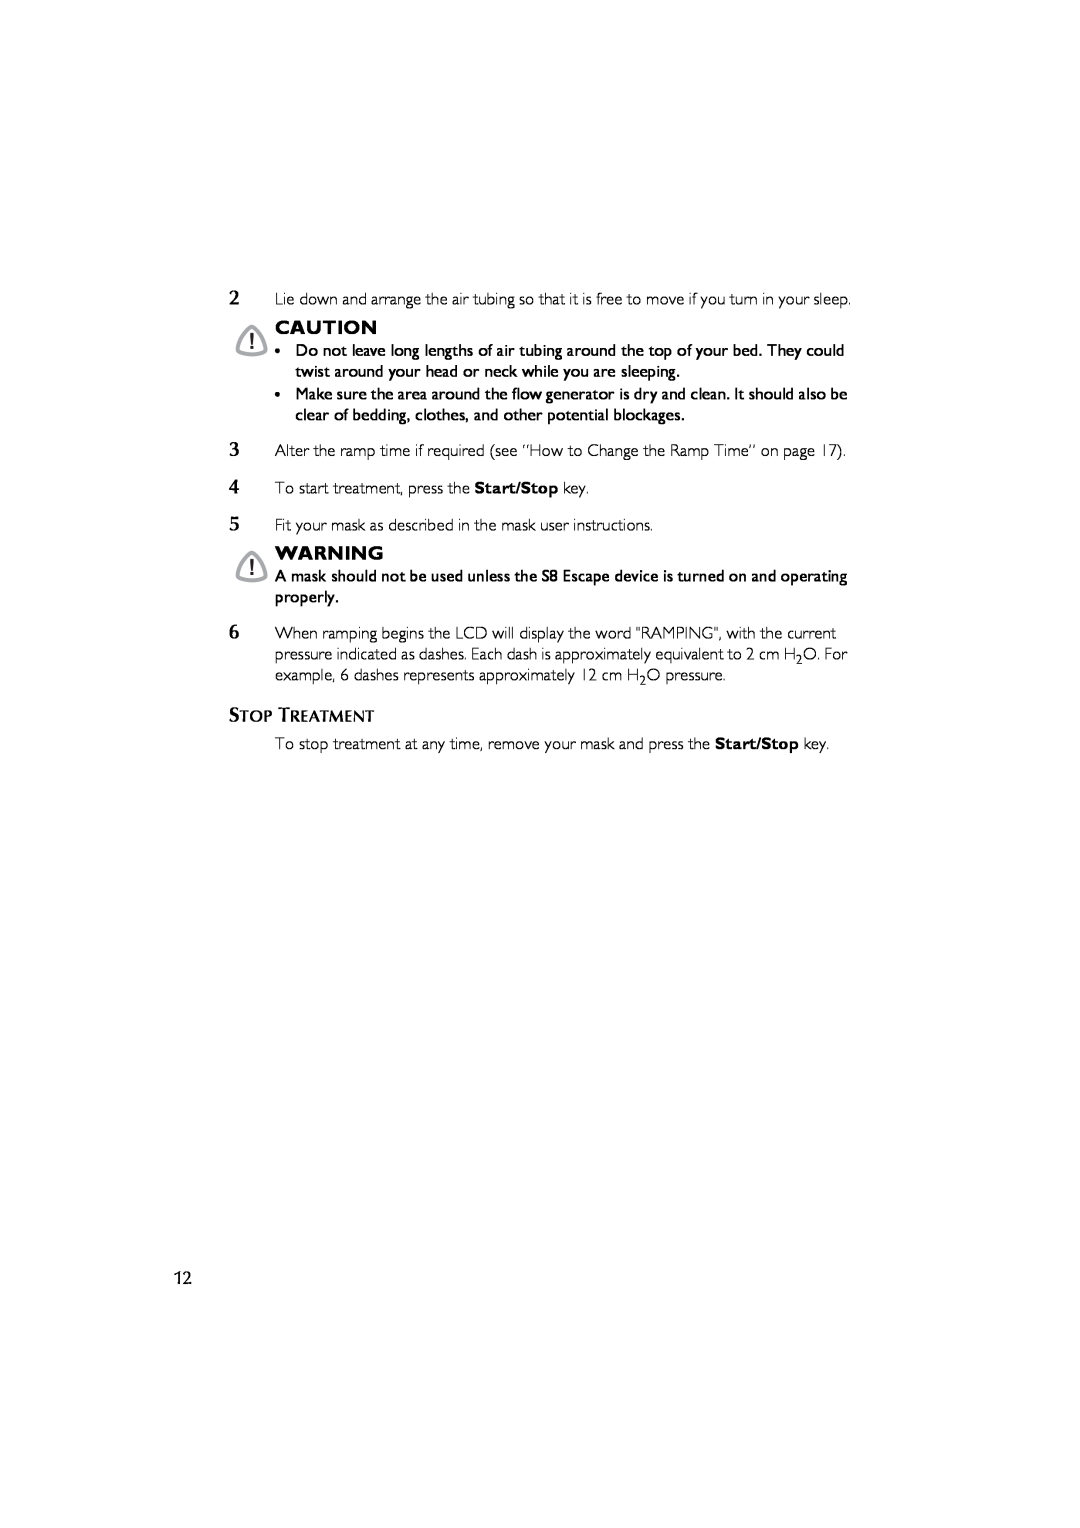 ResMed s8 user manual 4To start treatment, press the Start/Stop key 